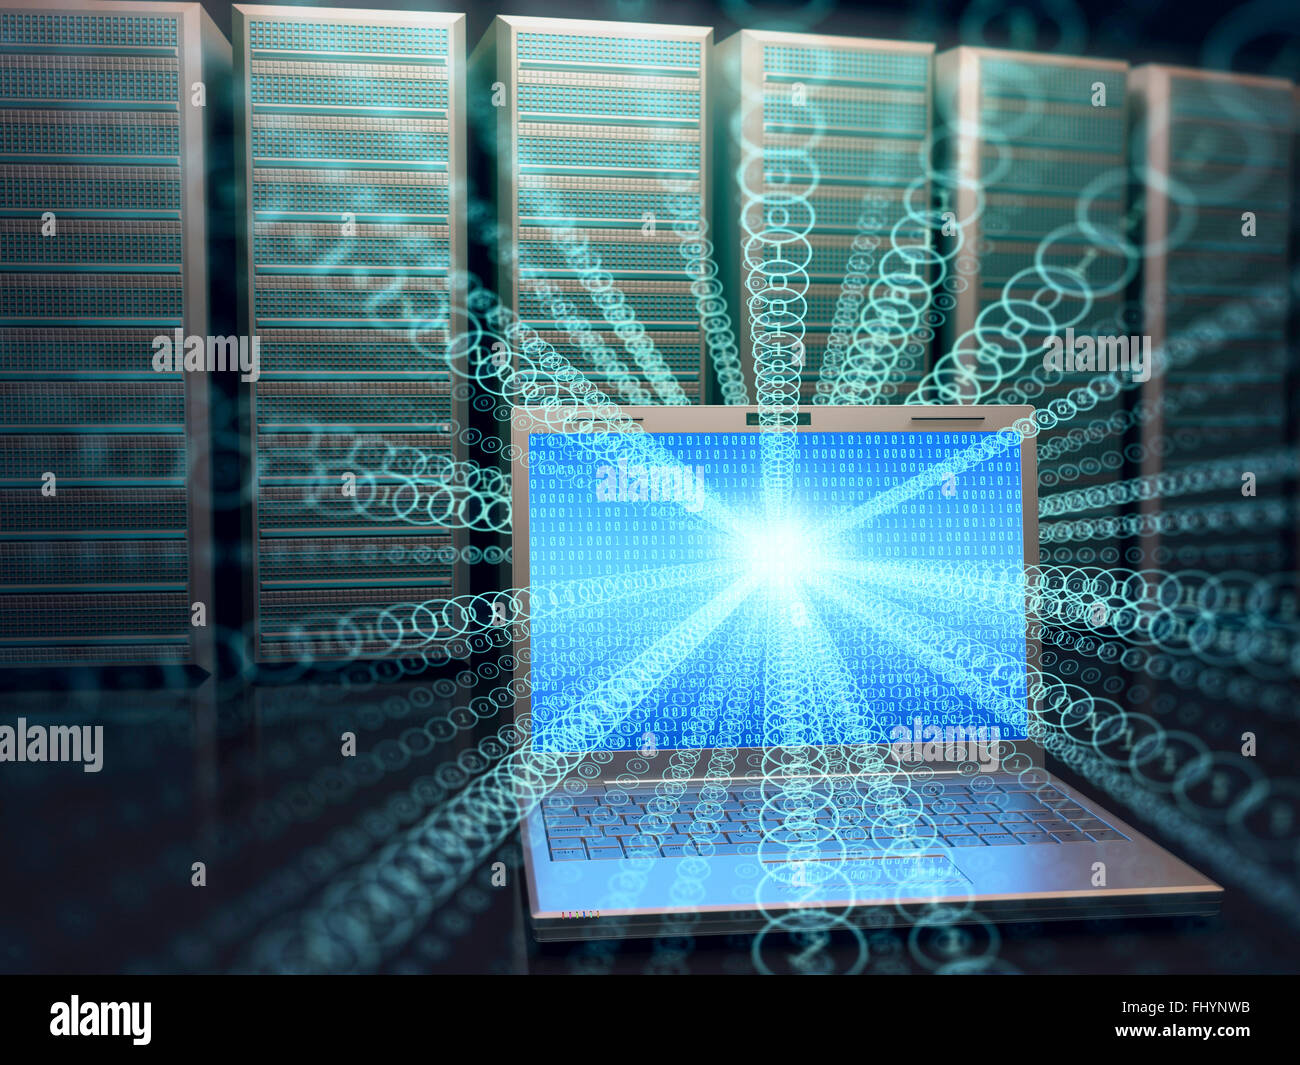 Laptop computer and servers, illustration. Stock Photo